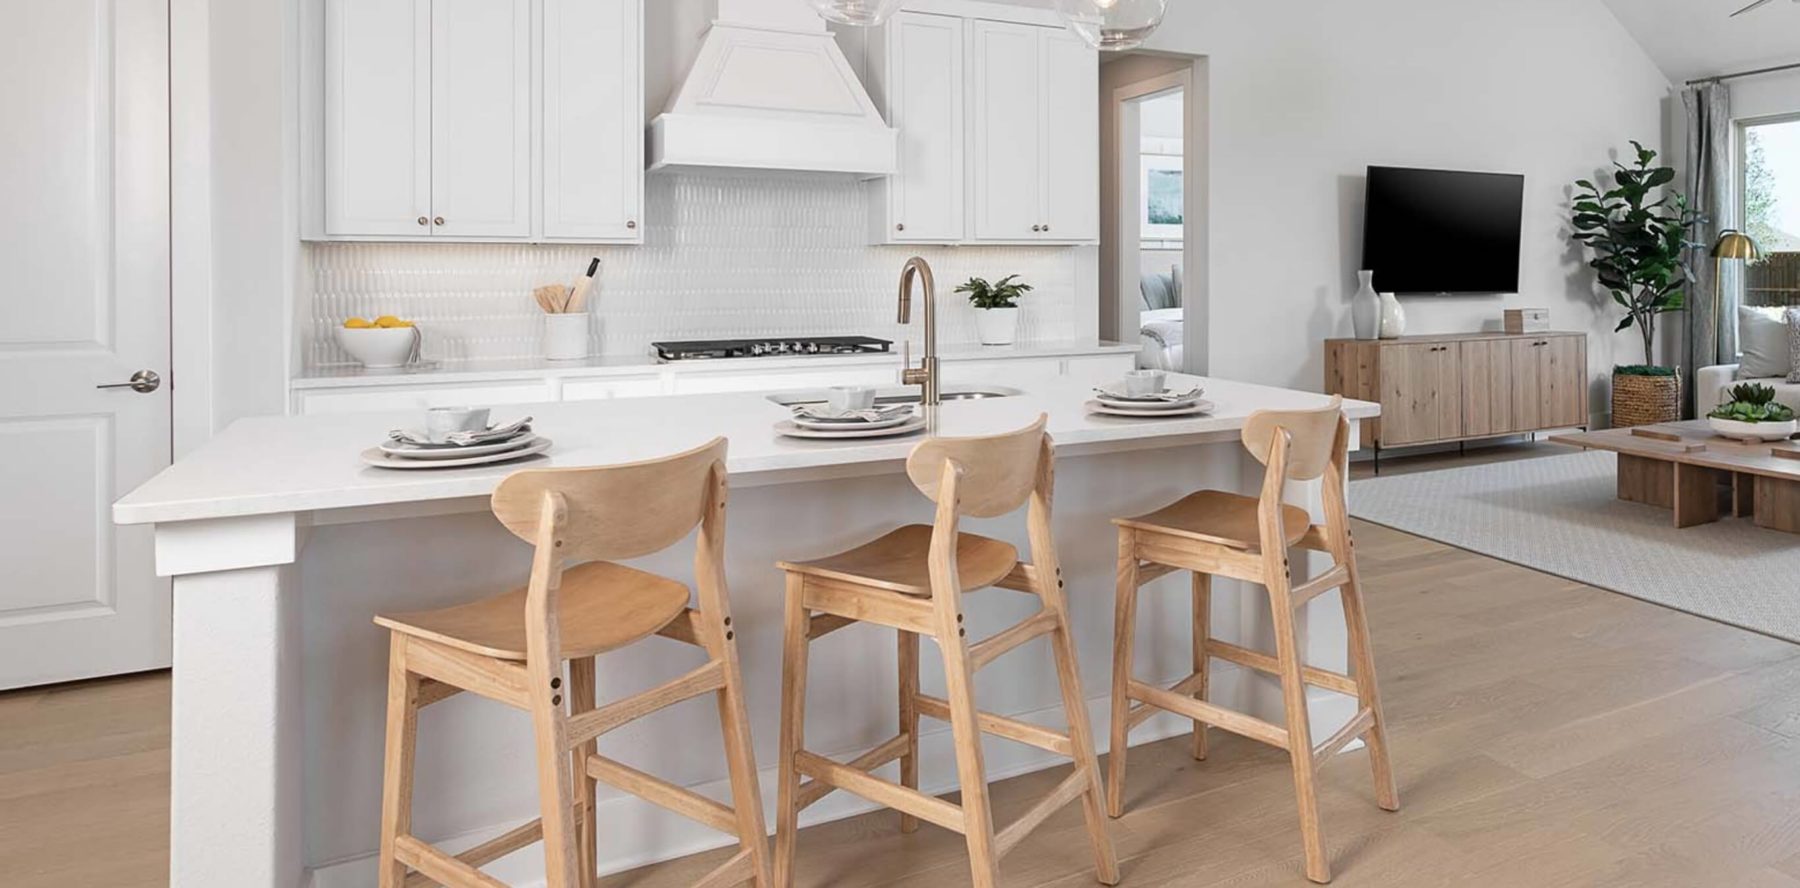 A white kitchen with wood stools and a TV in a new home.